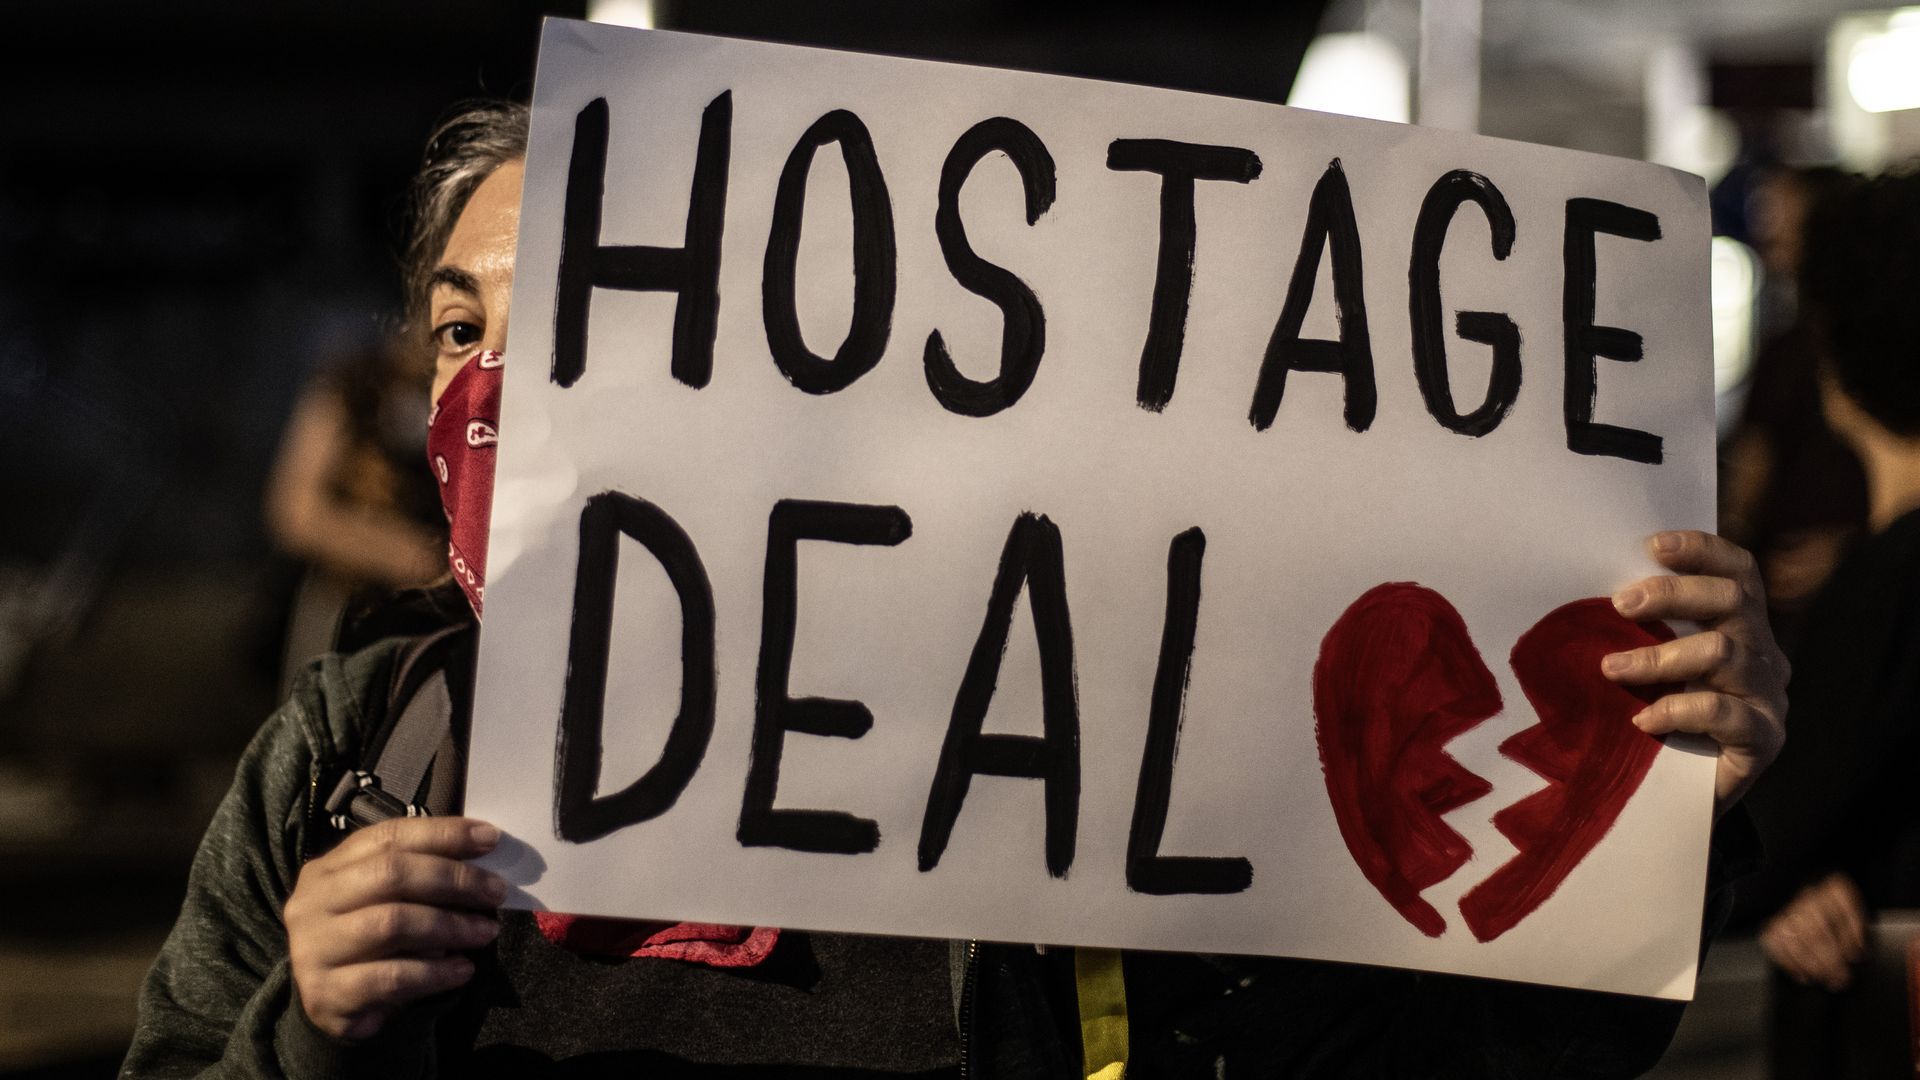 A woman holds a sign saying "Hostage Deal" at a demonstration in Tel Aviv, Israel.